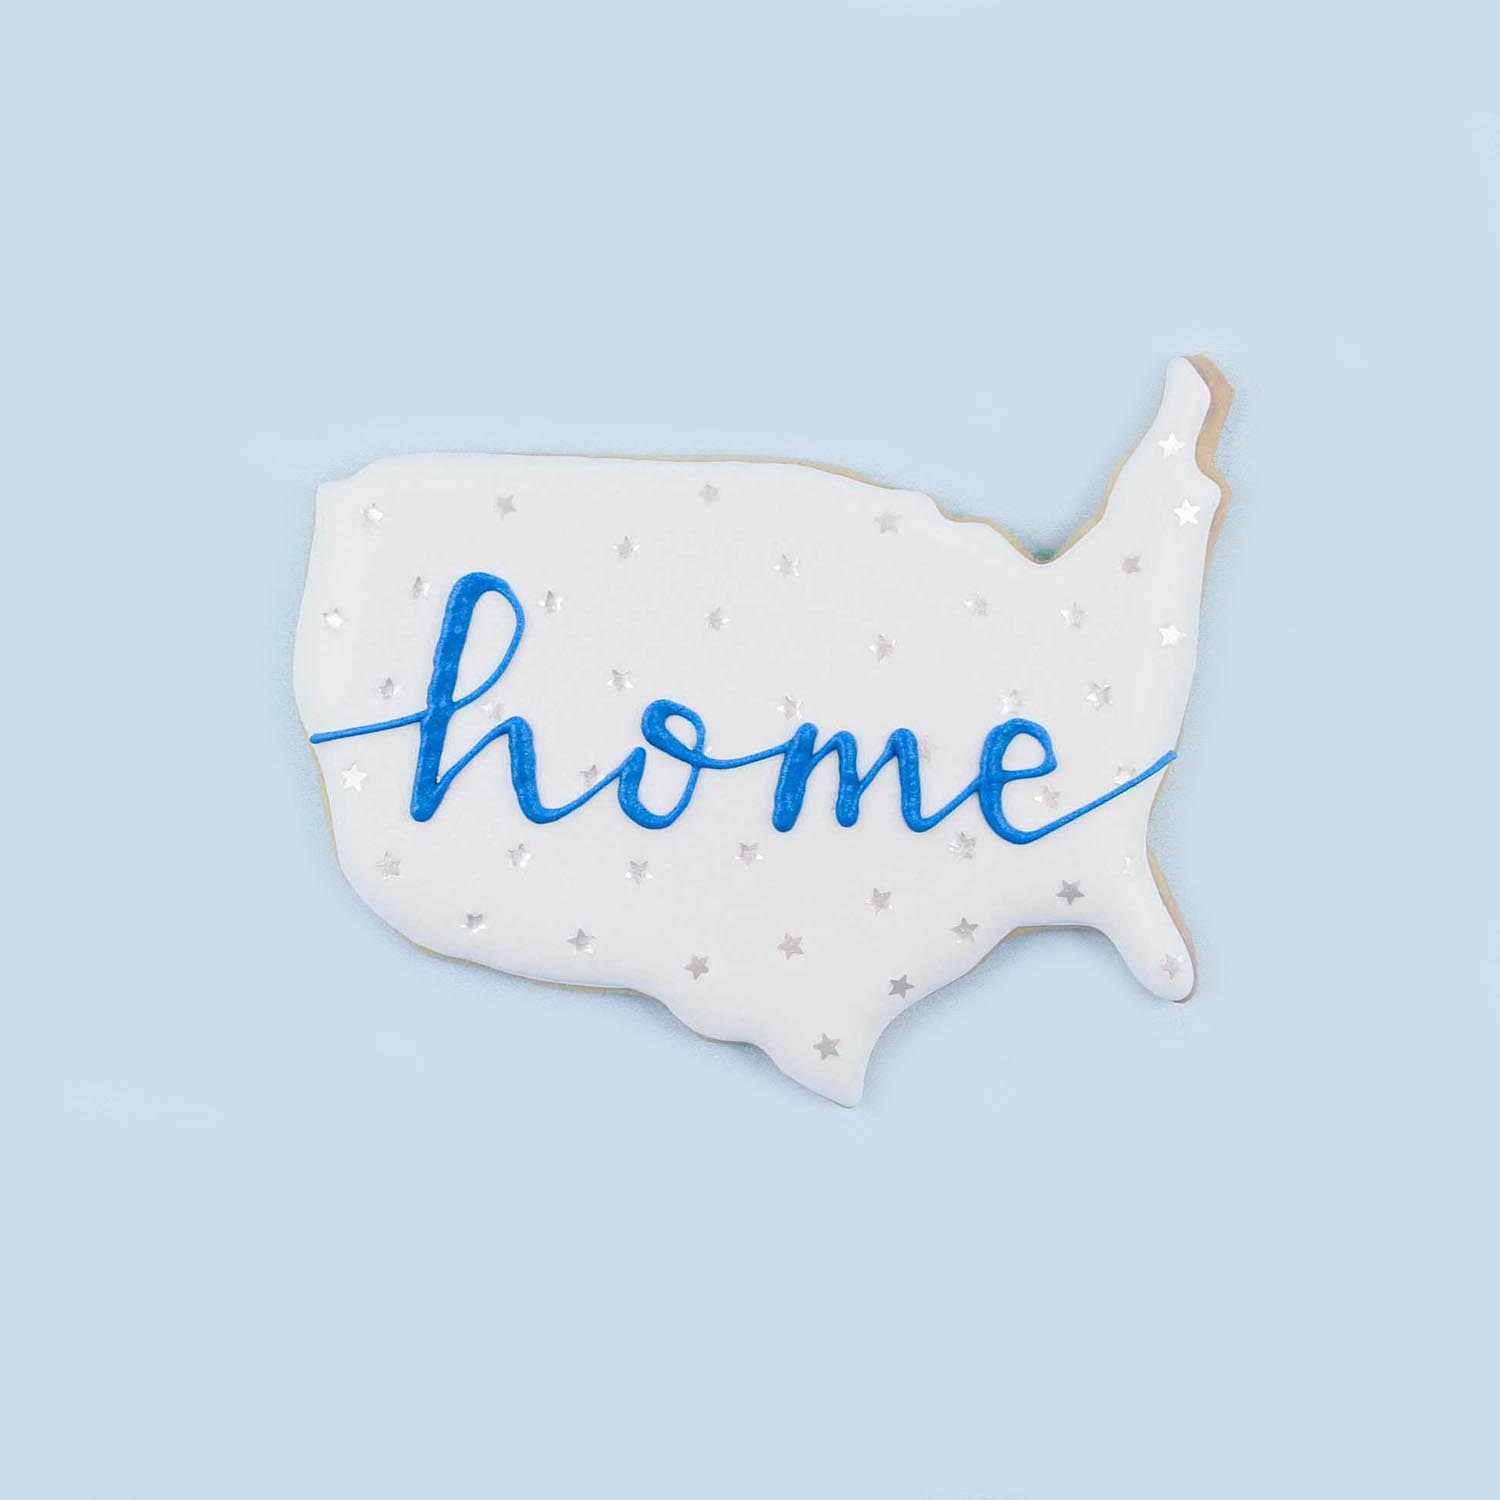 United state cut out cookie decorated in white royal icing, edible glitter stars and home lettering on the cookie